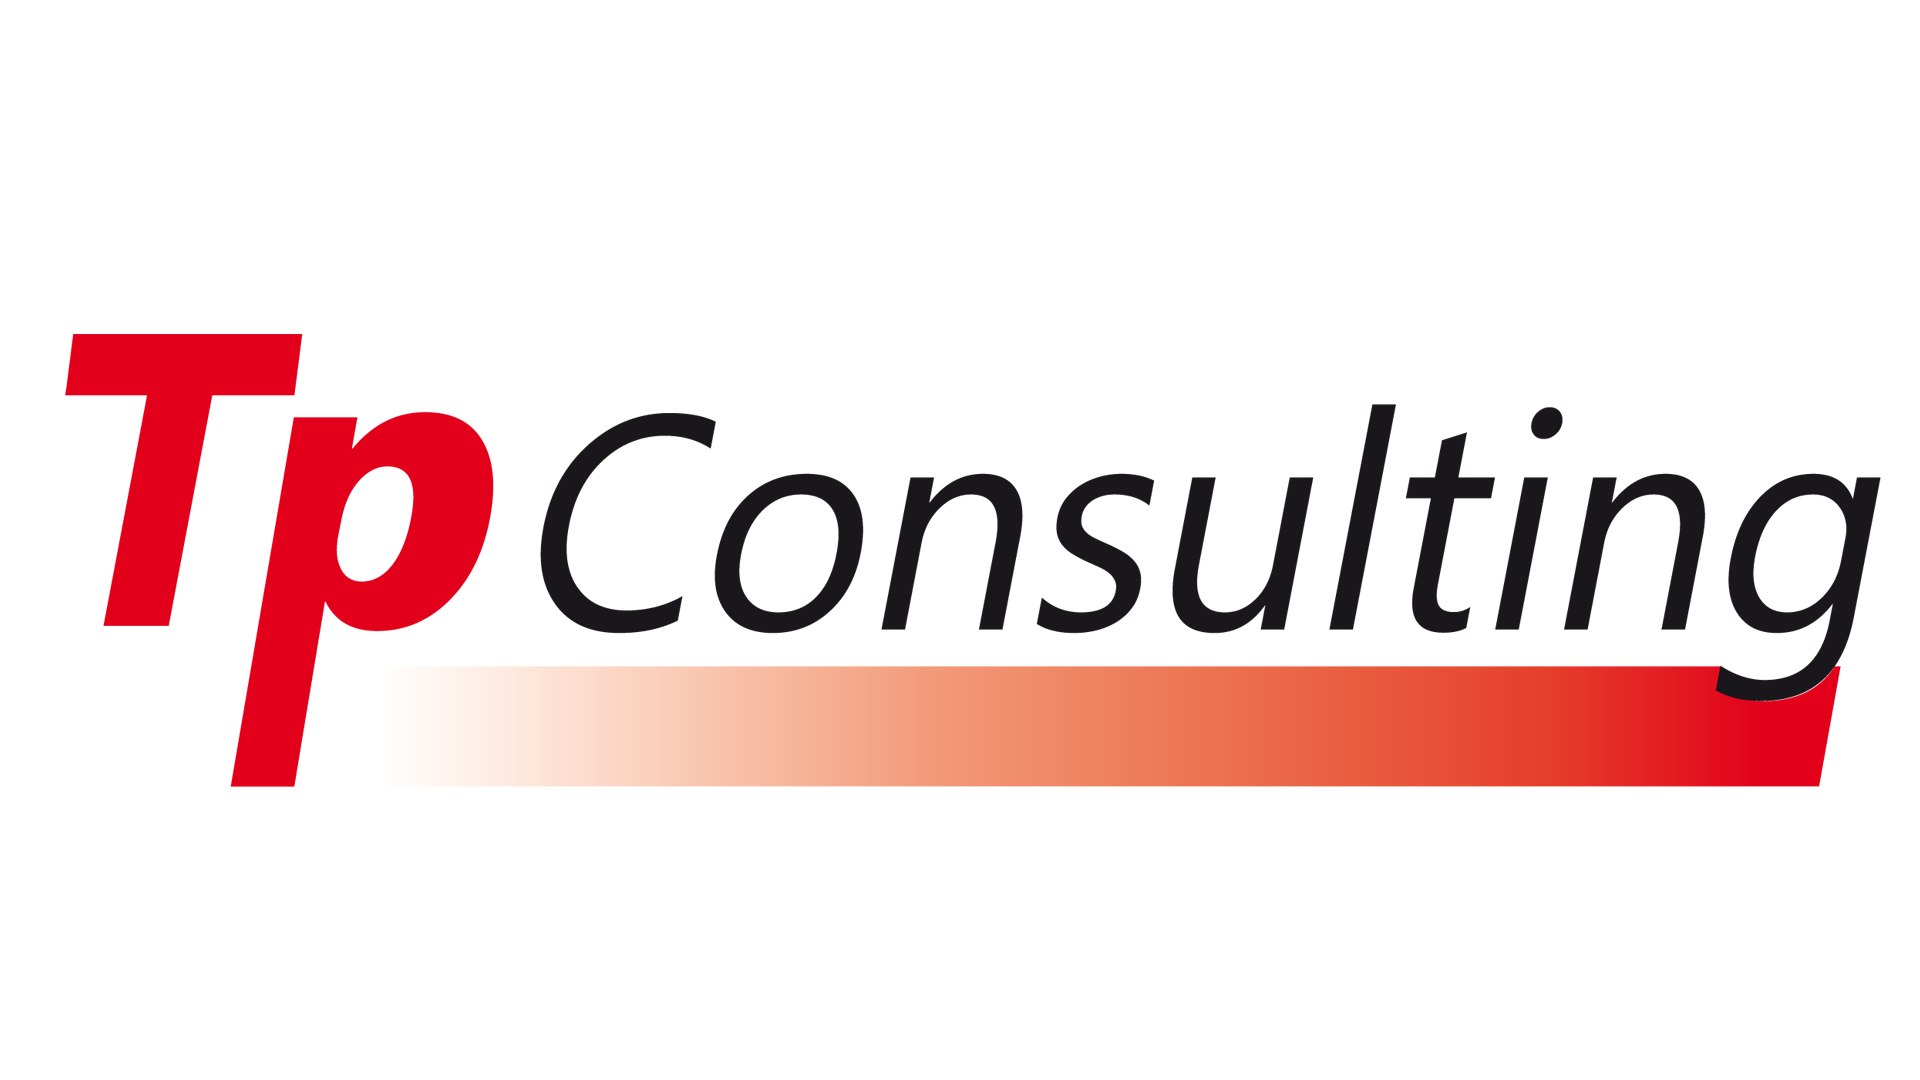 TP Consulting